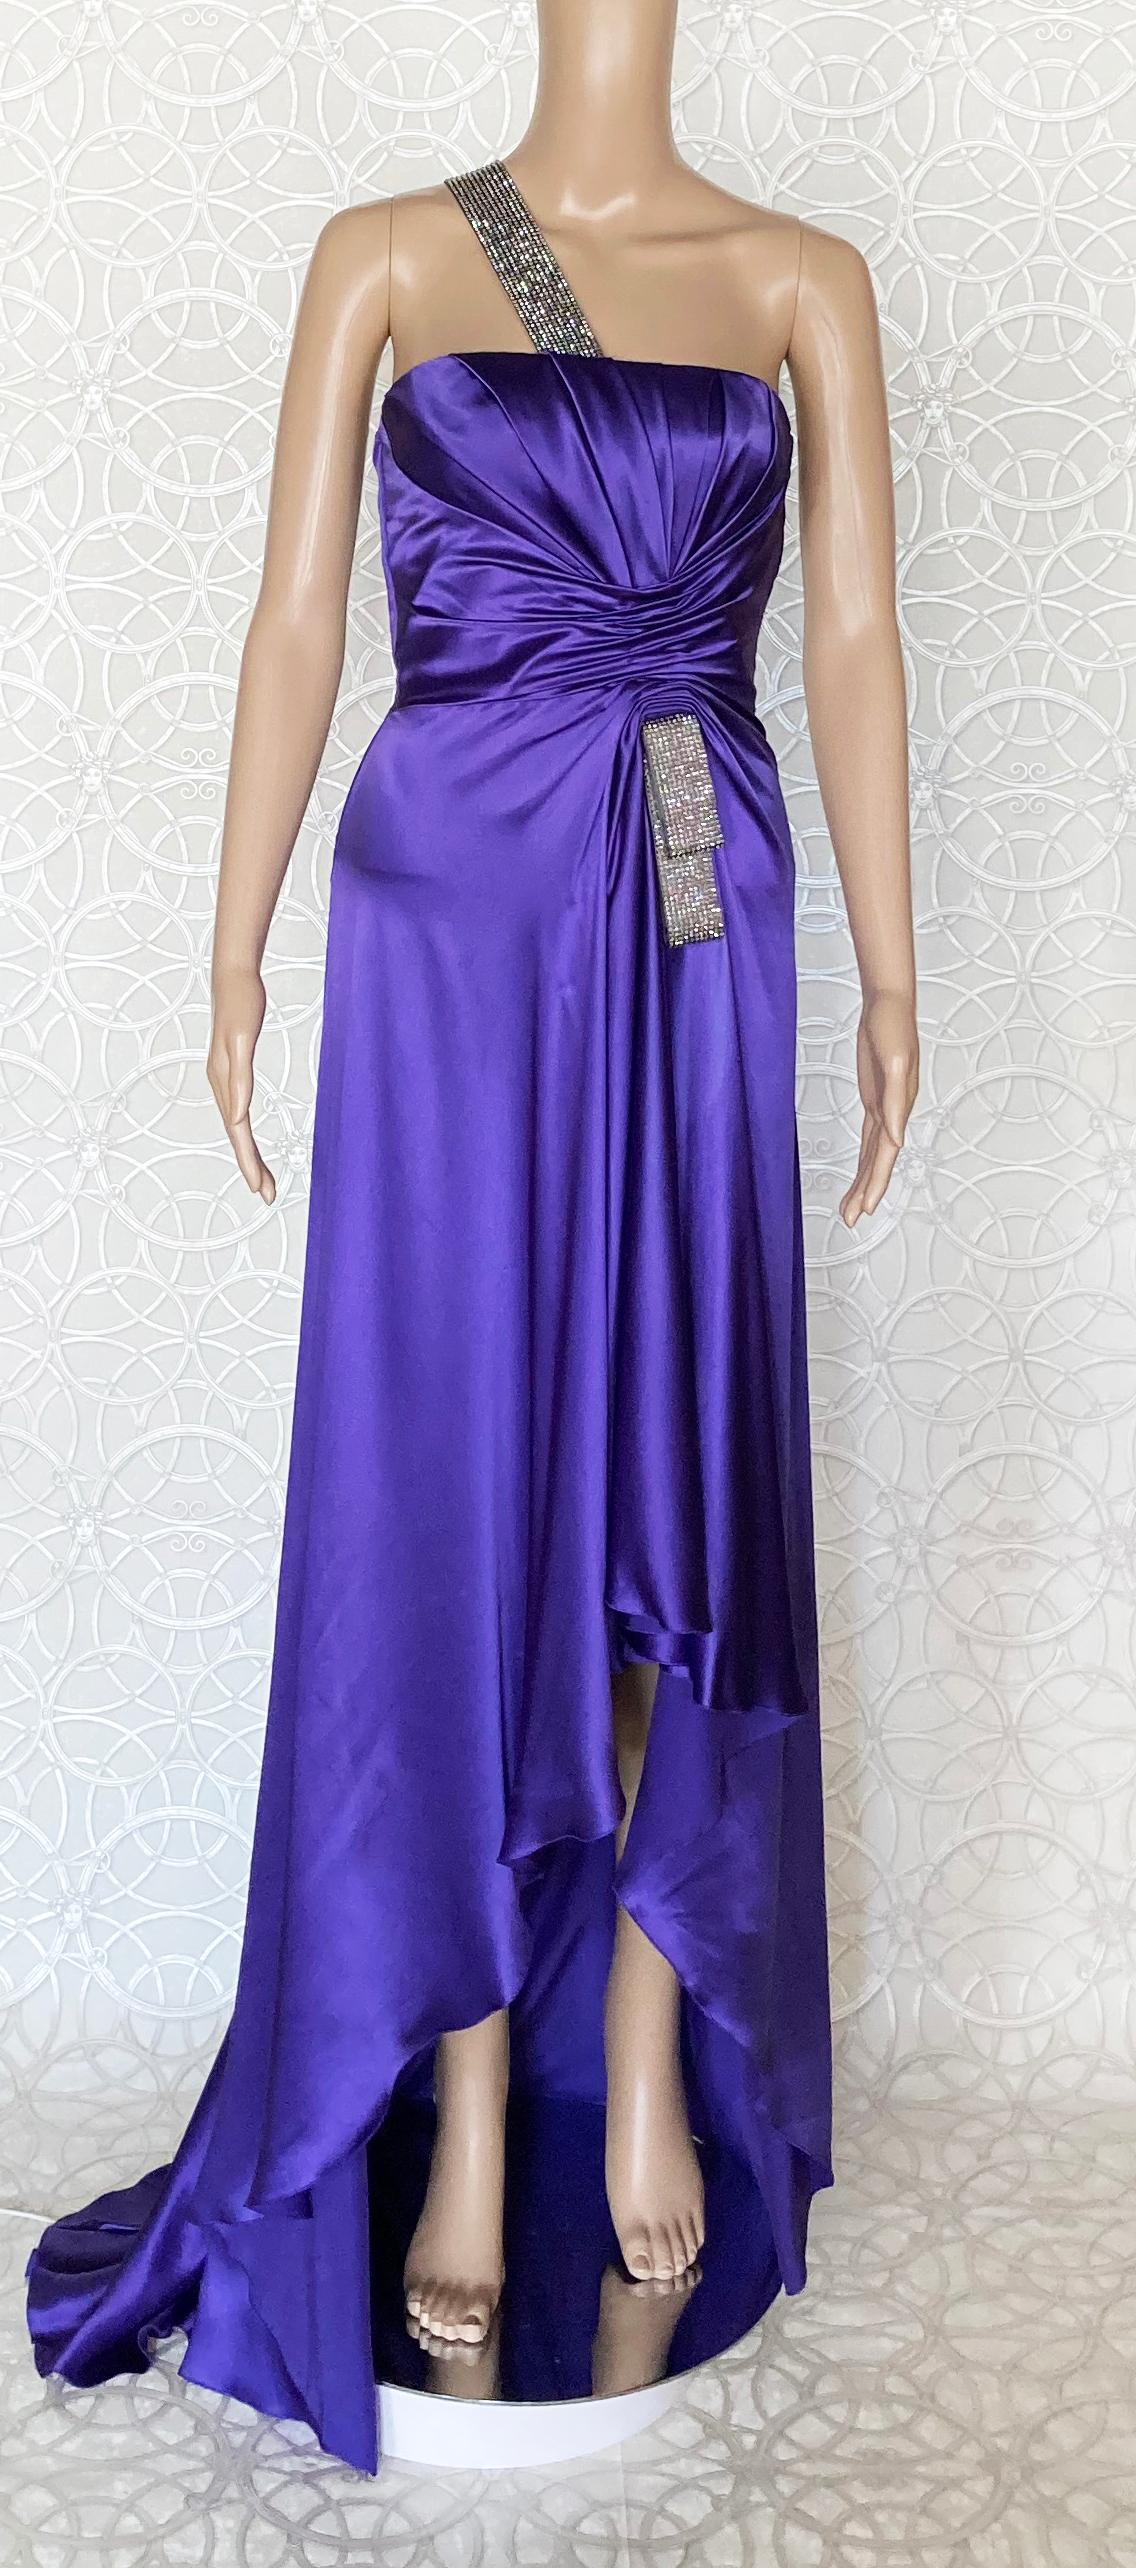 Women's $8, 935 NEW VERSACE PURPLE CRYSTAL EMBELLISHED LONG 100% SILK DRESS Gown 38 - 2 For Sale